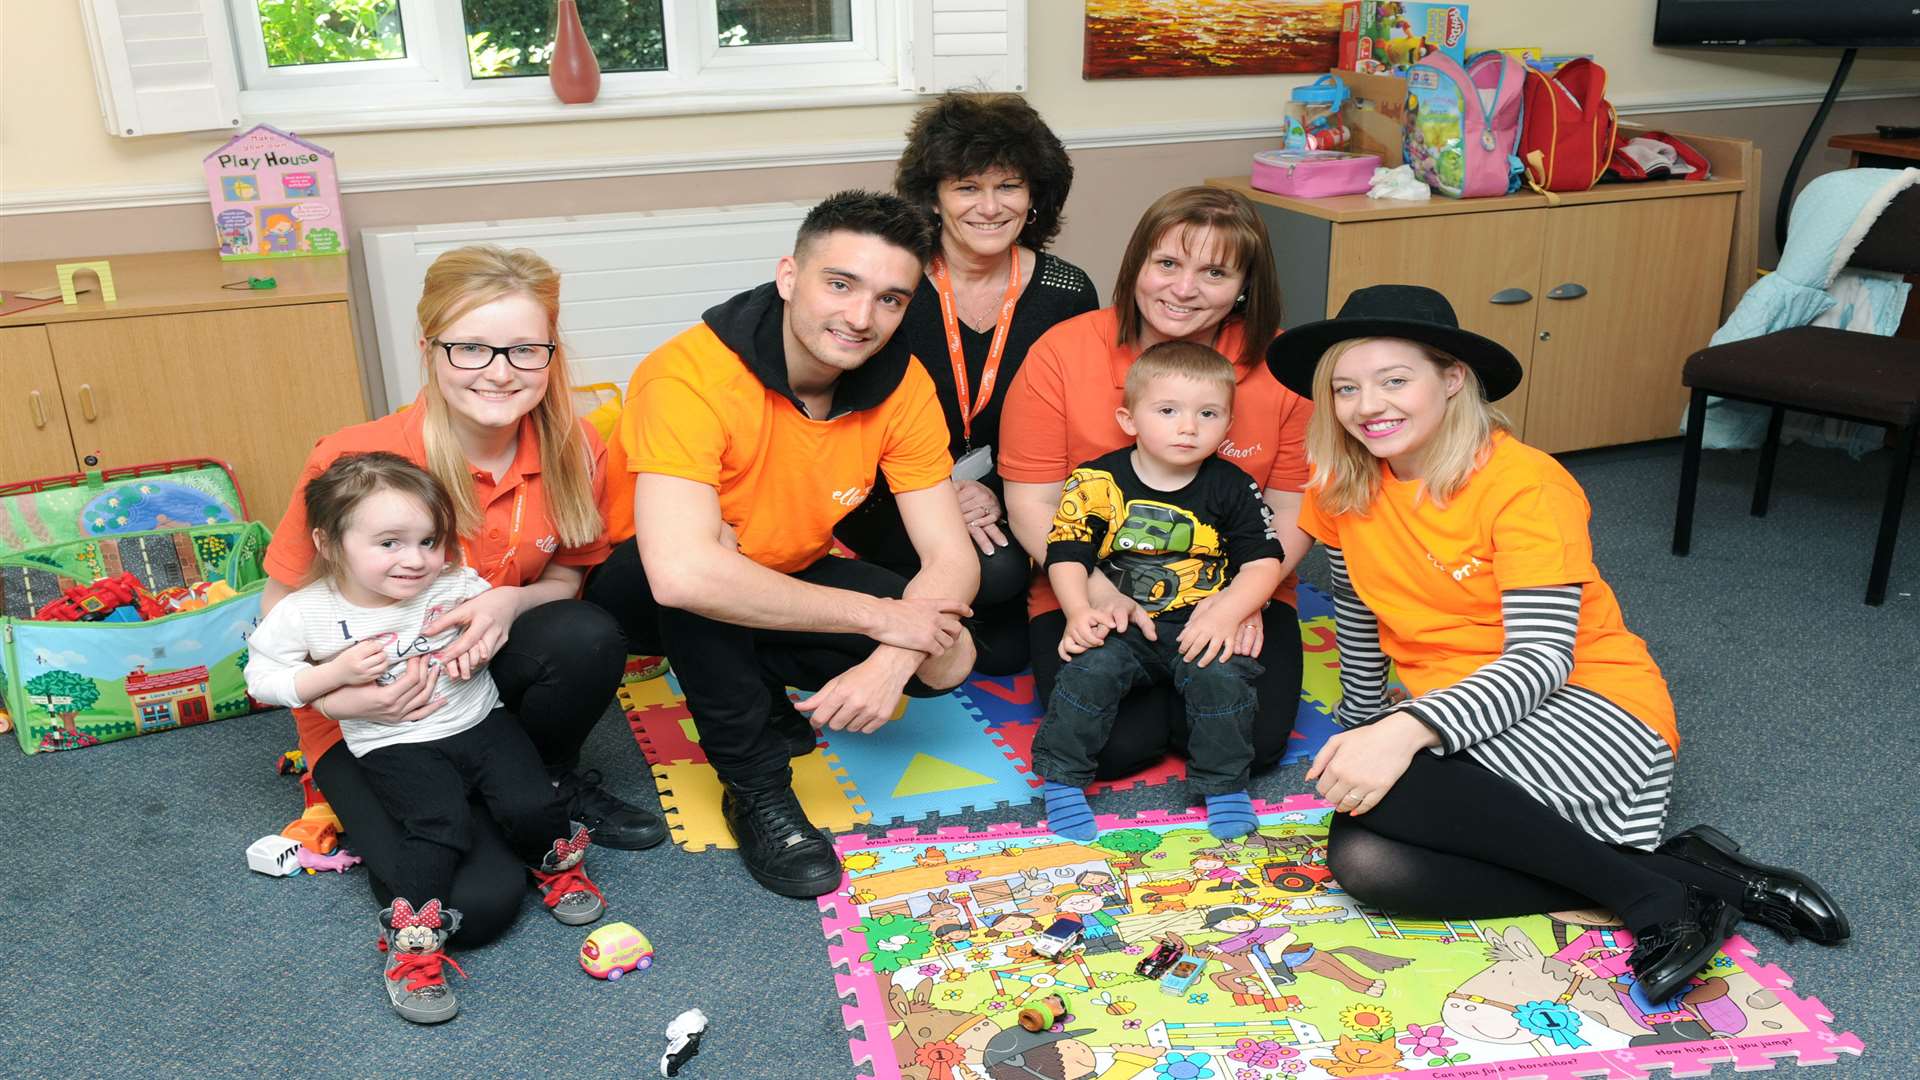 Tom Parker with (l-r) respite support worker Melissa Hirst, respite co-ordinator Tina Humphreys, respite support worker Vicki Stanford and actress Kelsey Hardwick, and children supported by ellenor